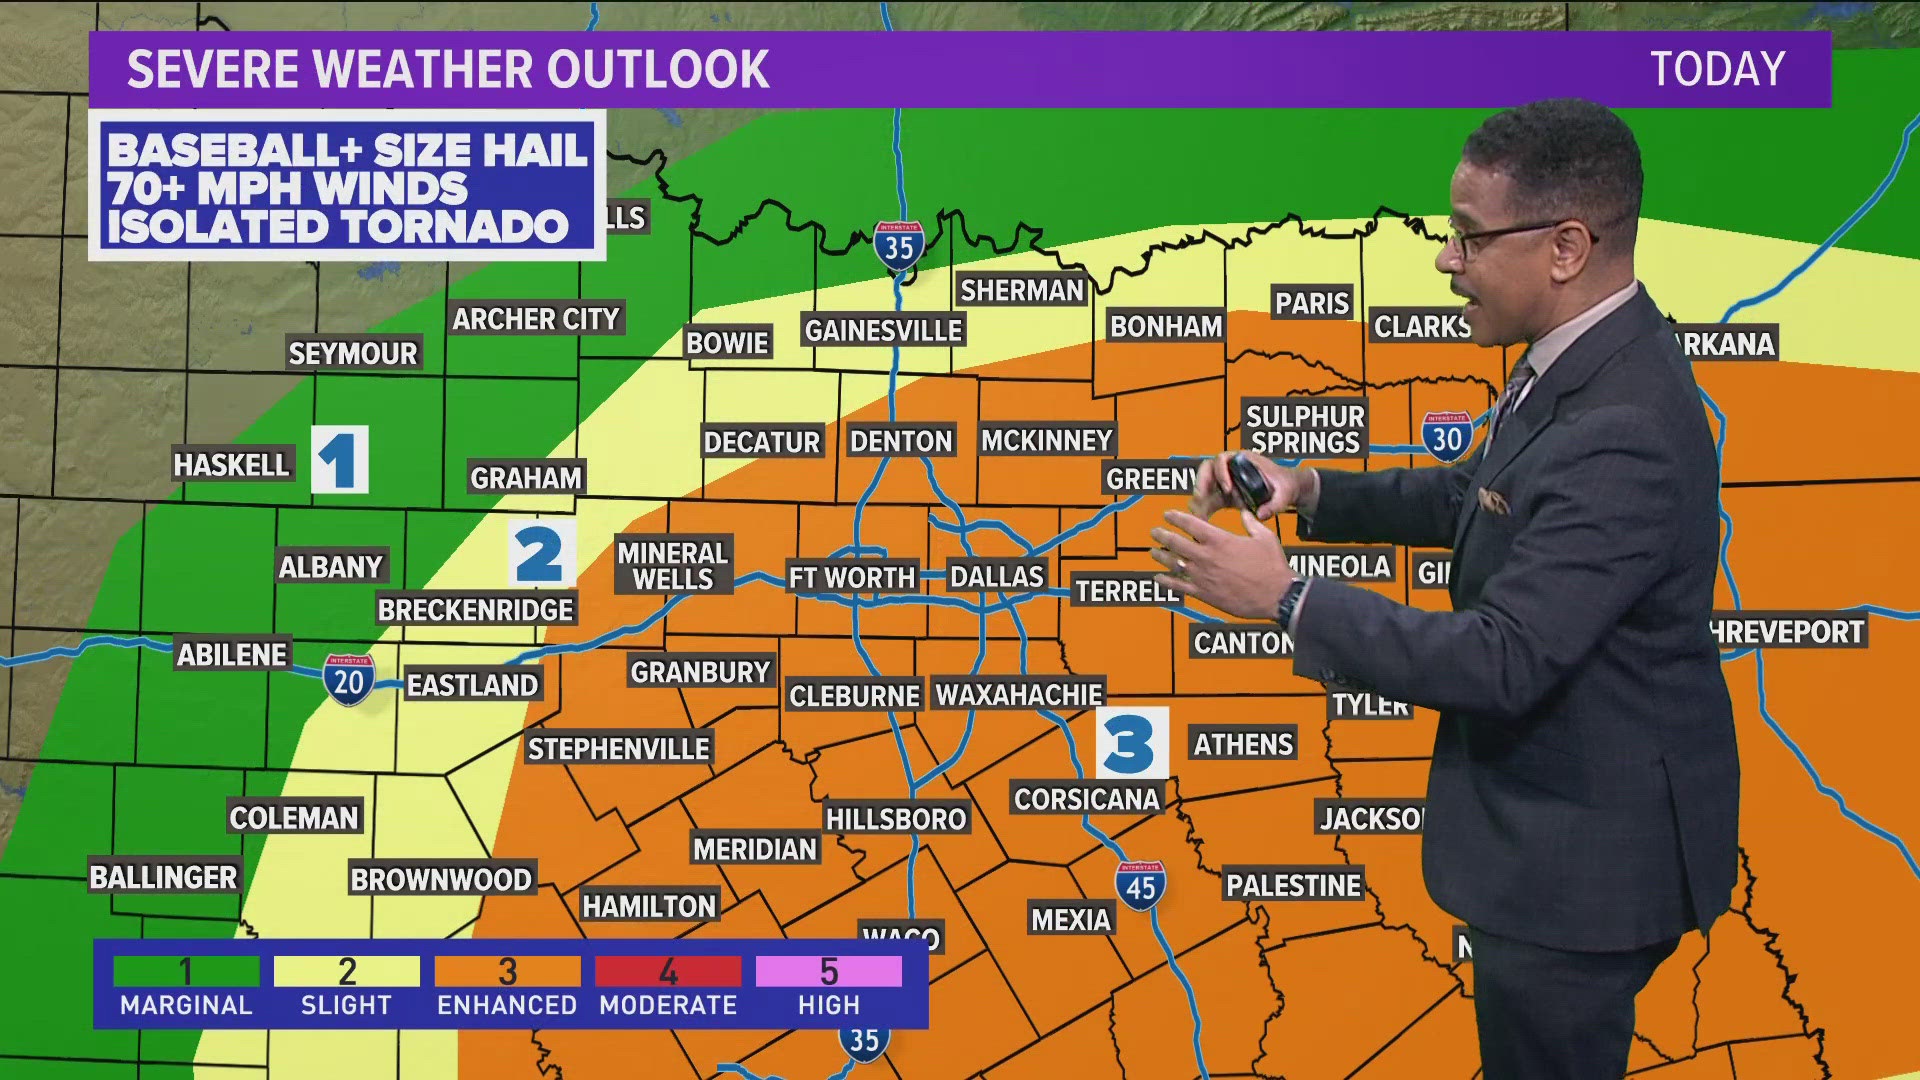 Greg Fields has a look at the latest North Texas forecast as more severe storms are expected.